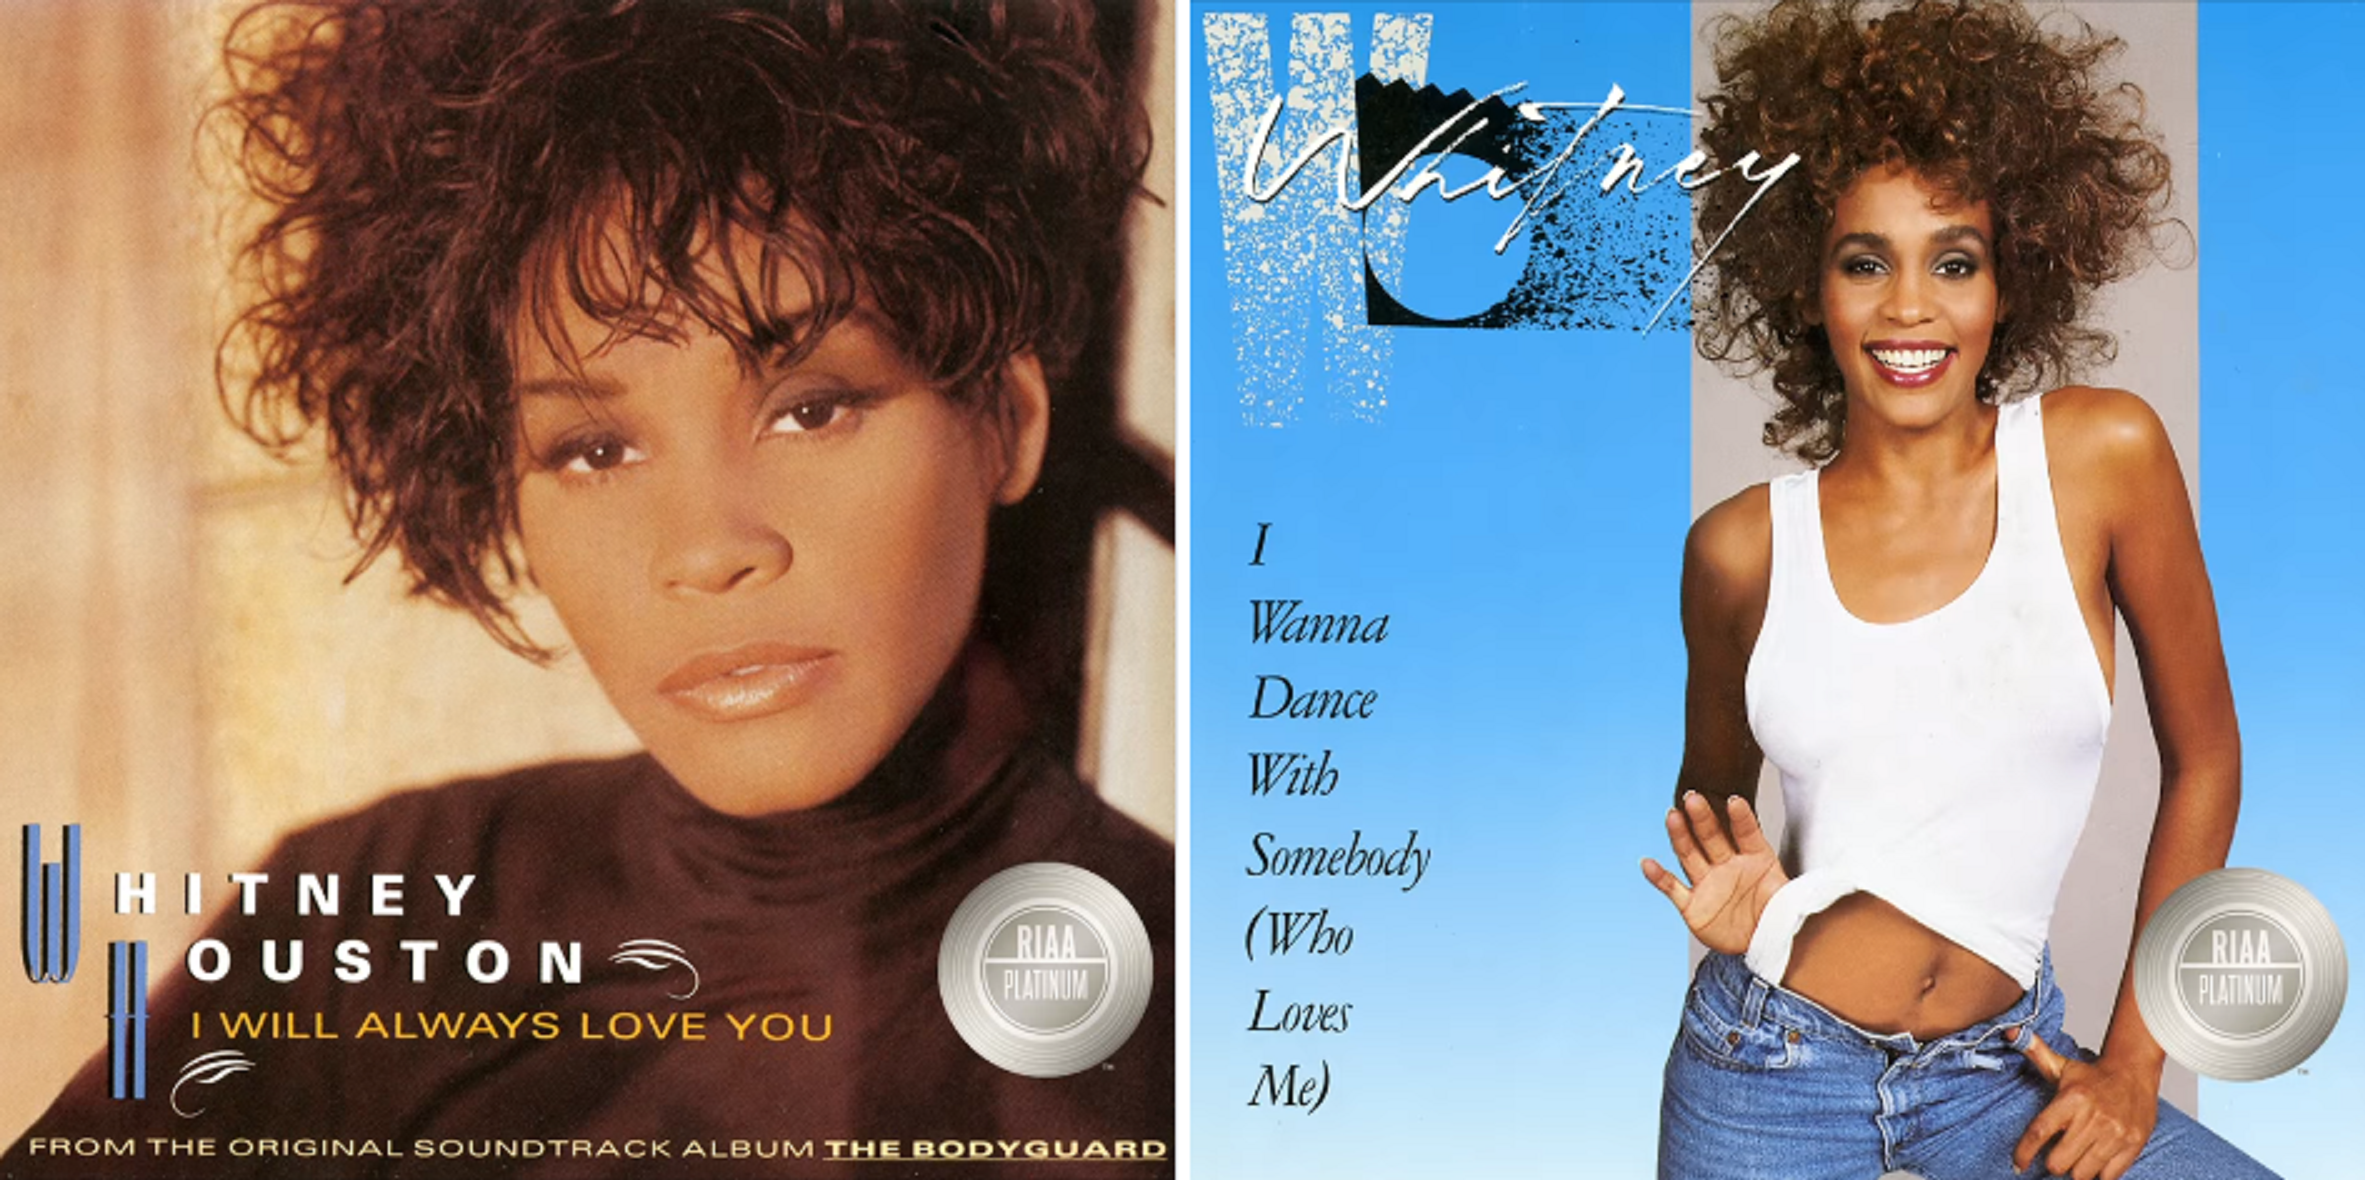 From ‘I Will Always Love You’ to ‘I Look To You’ – Vote for Whitney Houston’s Best Songs!